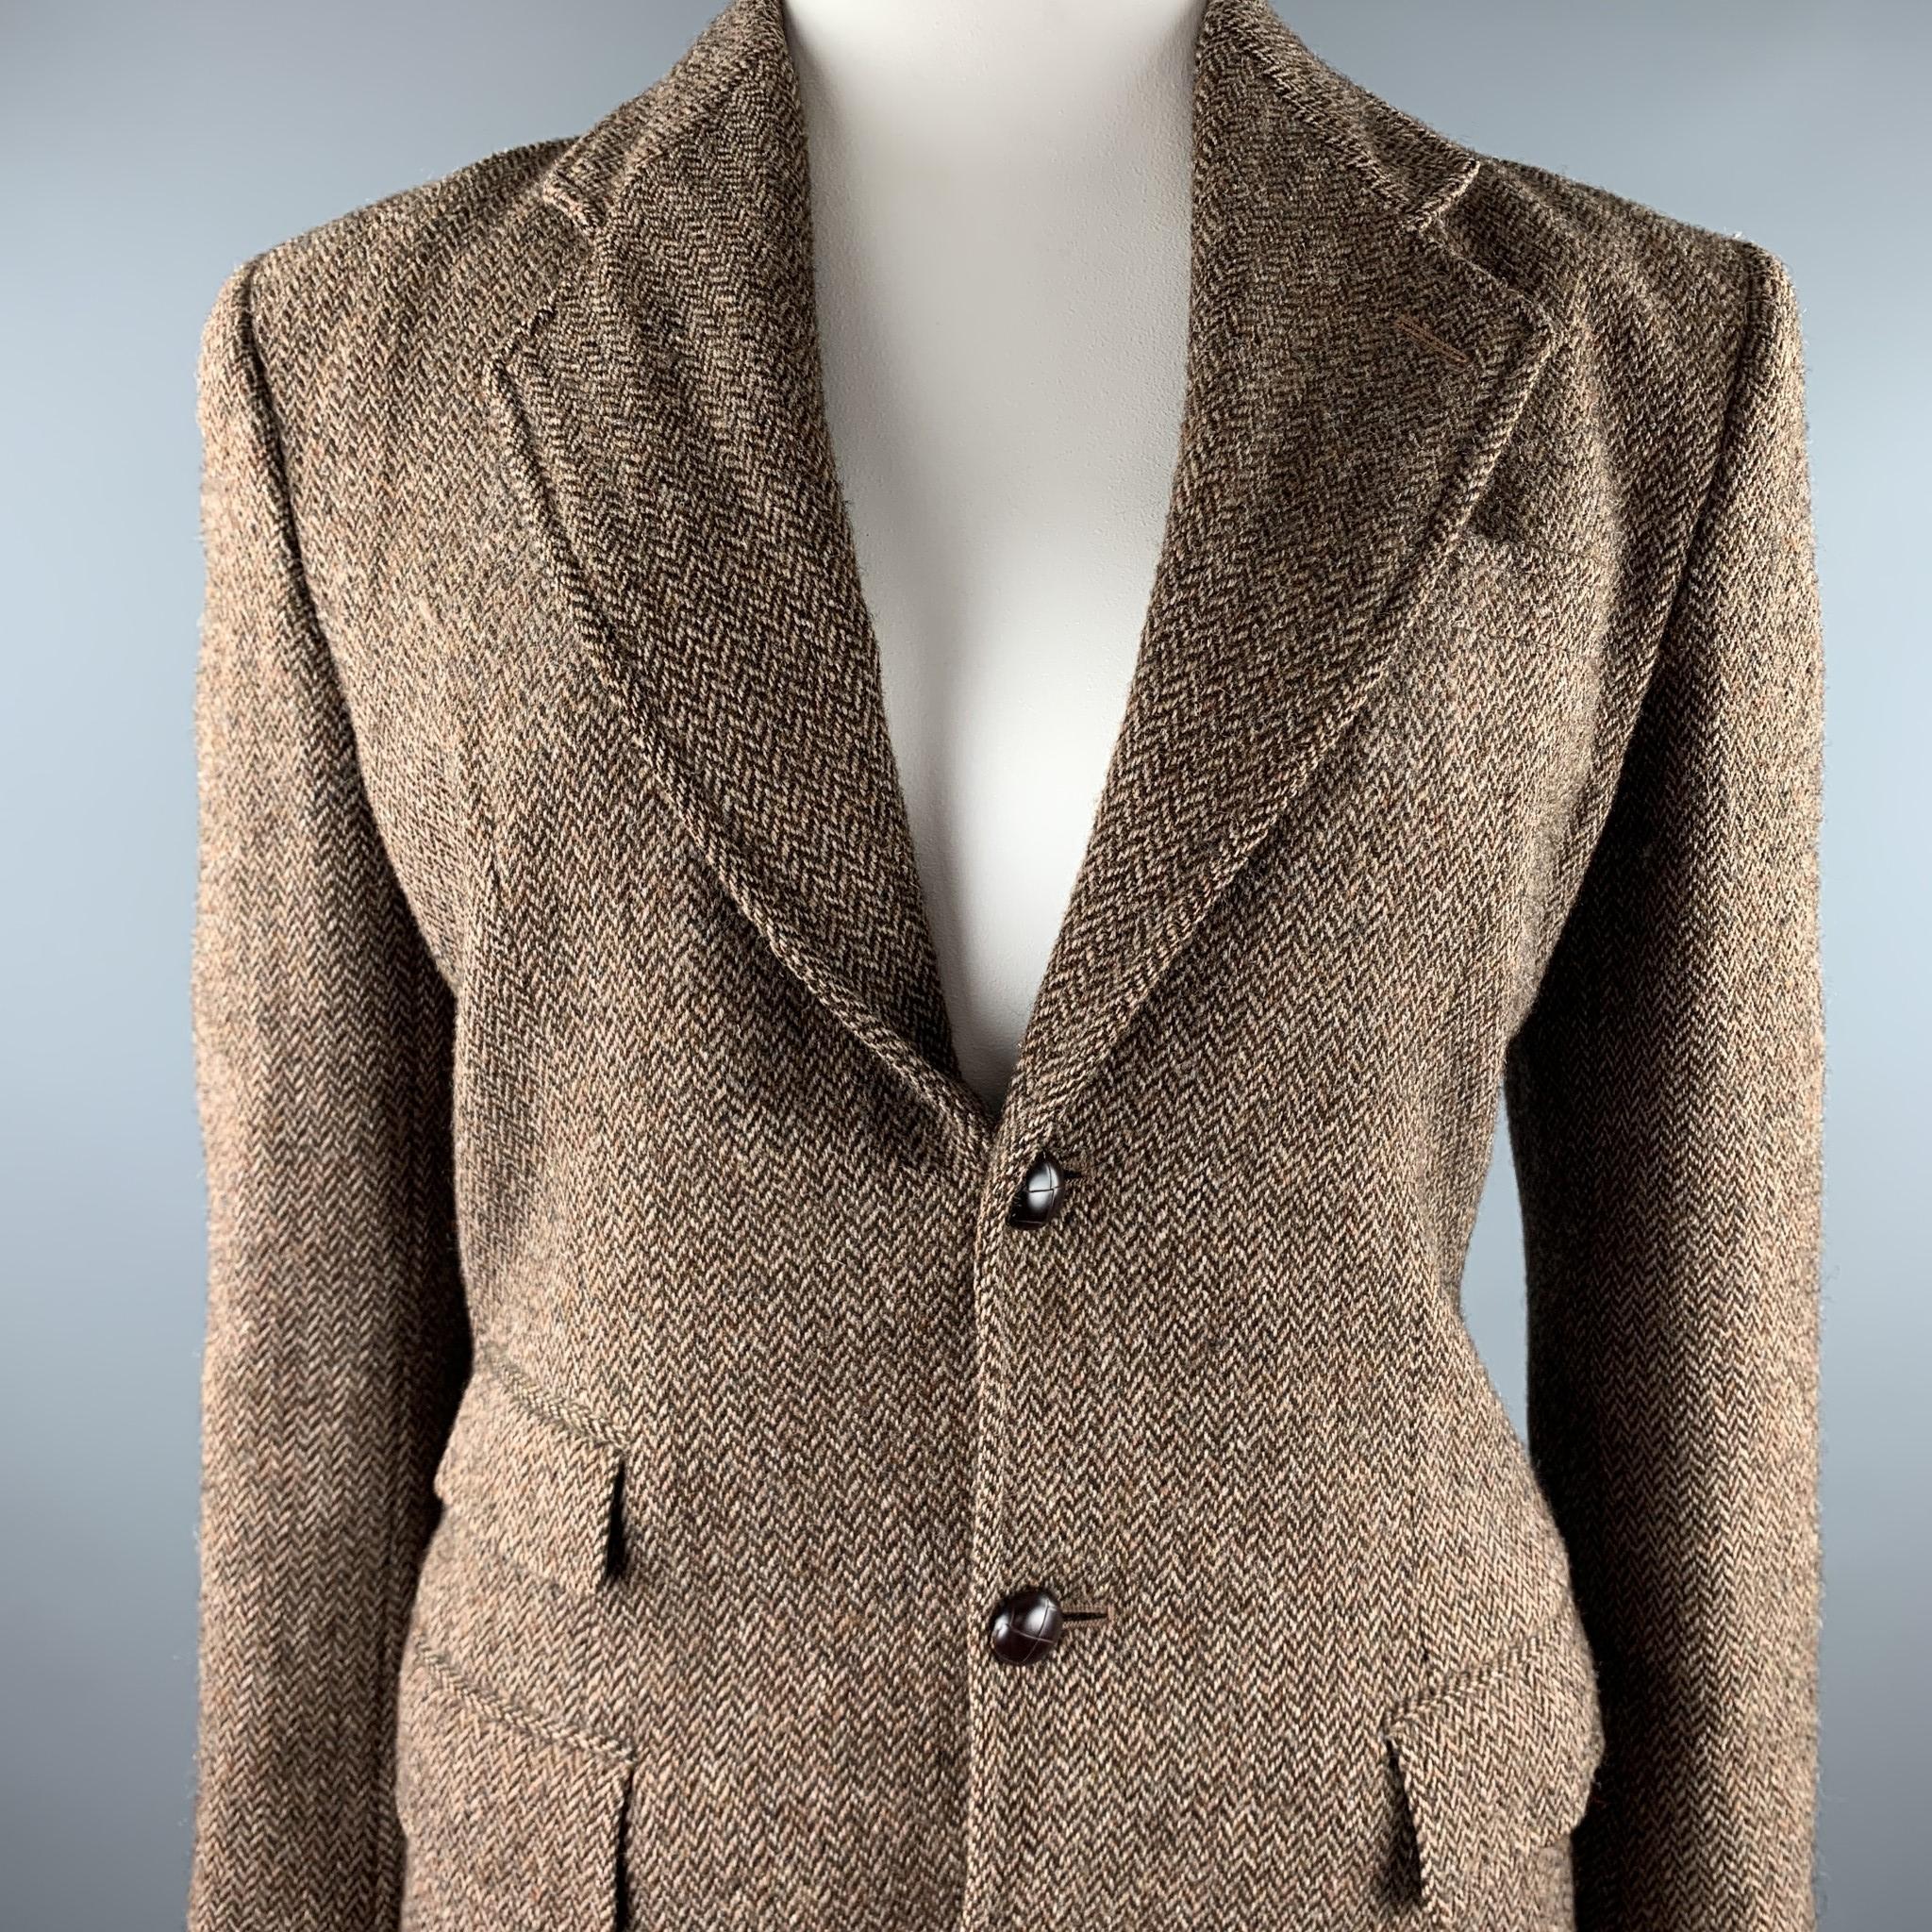 RALPH LAUREN blazer comes in a brown tweed herringbone wool with a full liner featuring a notch lapel, flap pockets, and a three button closure. Made in USA.

Very Good Pre-Owned Condition.
Marked: 4

Measurements:

Shoulder: 18 in. 
Bust: 40 in.